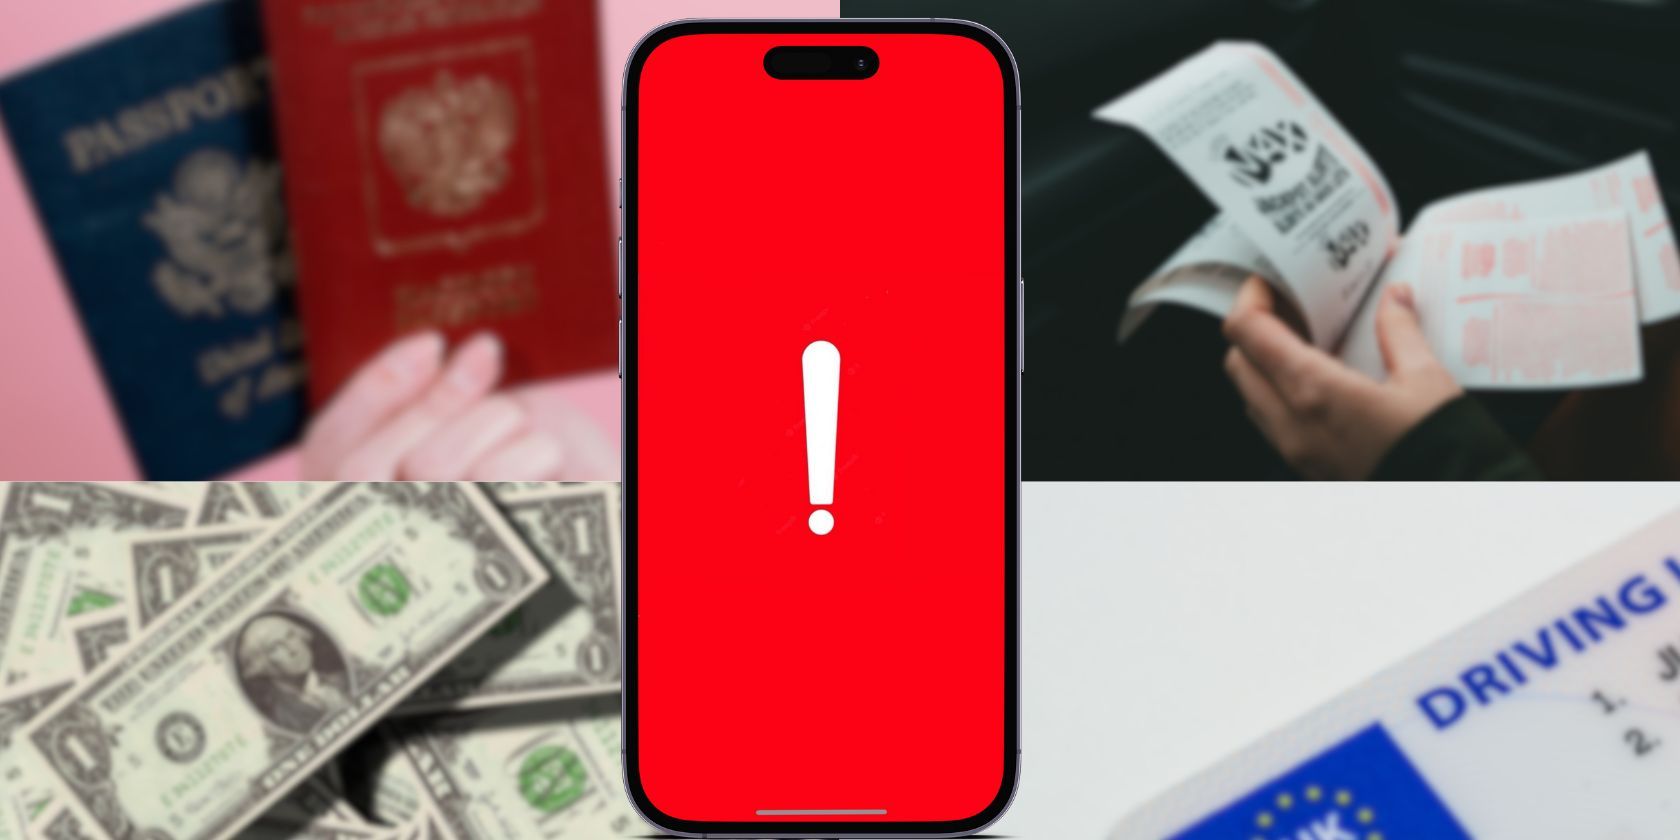 Red Exclamation Point Warning on Phone With Passport, ID, Tickets, and Cash as Background